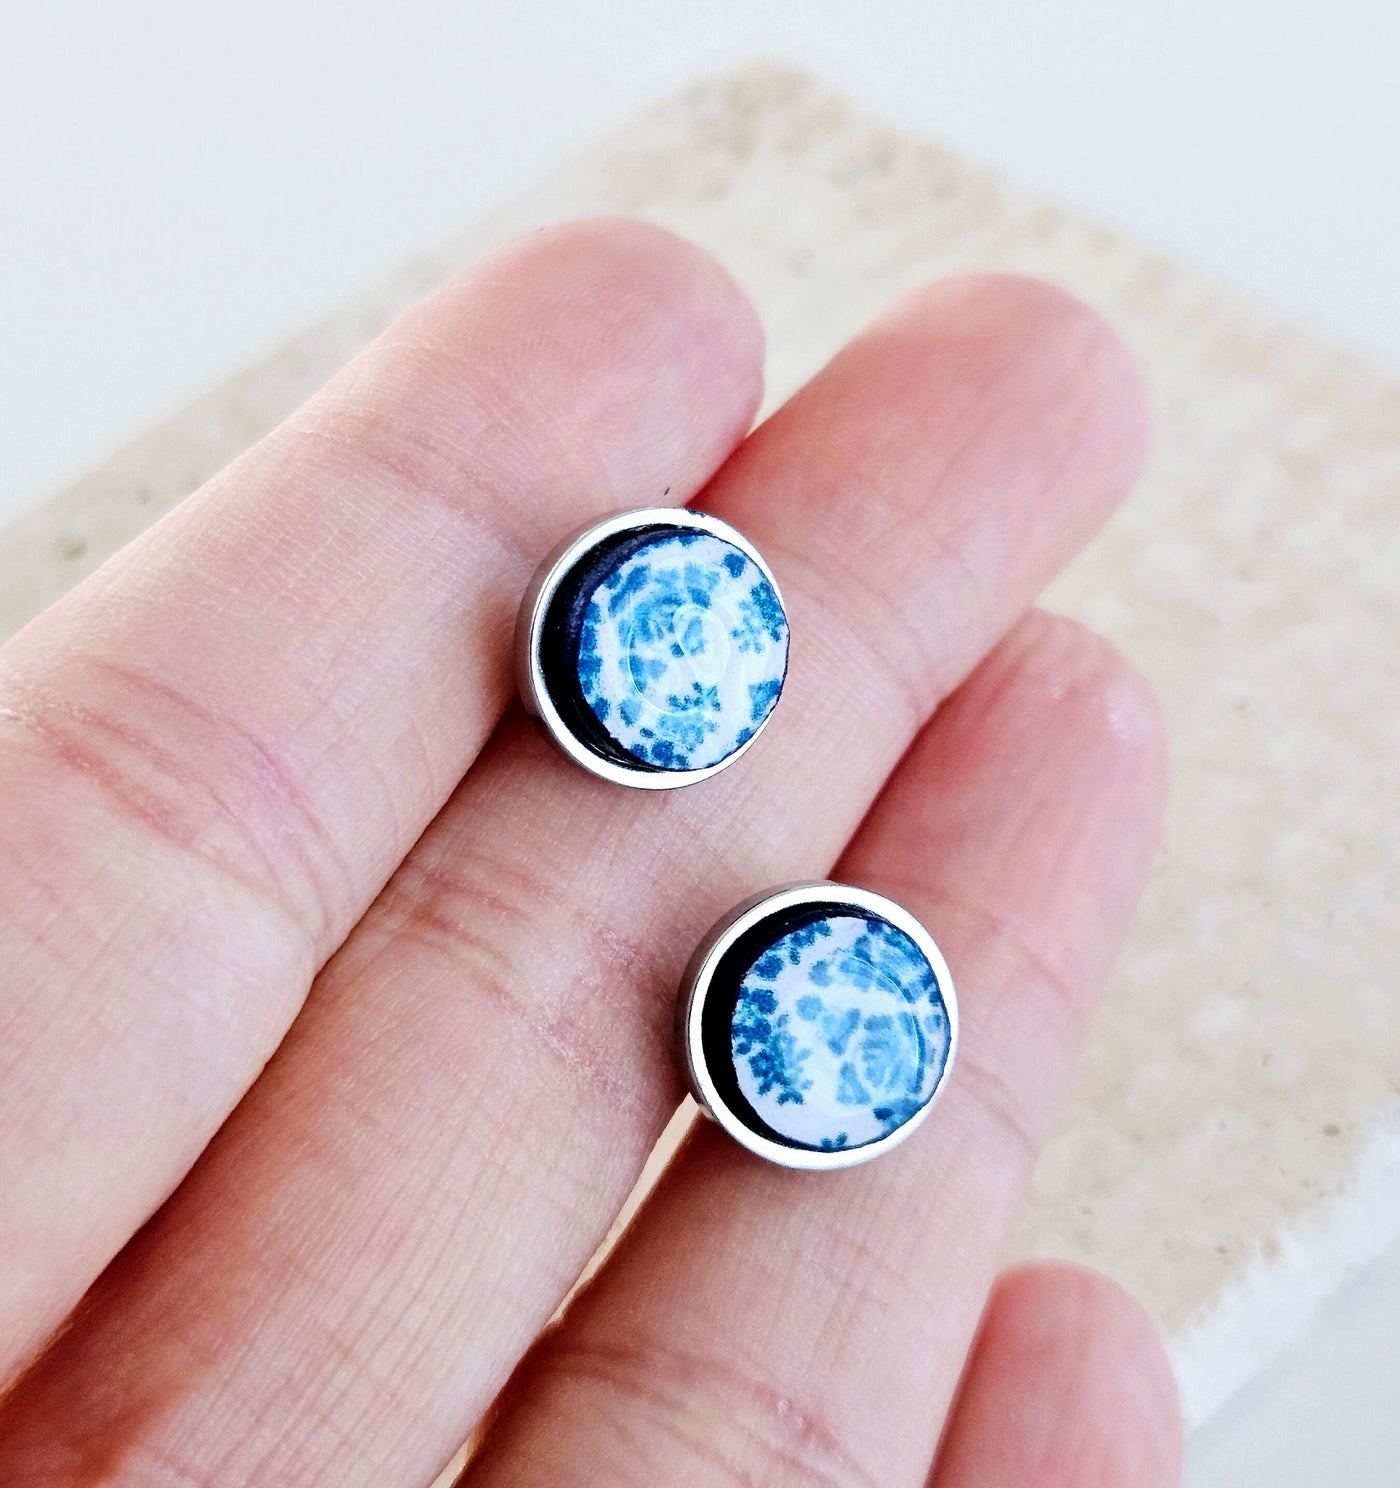 Portuguese Round Tile Stud Earring Small 10 mm Post Mismatched Blue Portugal Azulejo Earring Gift Antique Traditional Tile Travel Mom Gift